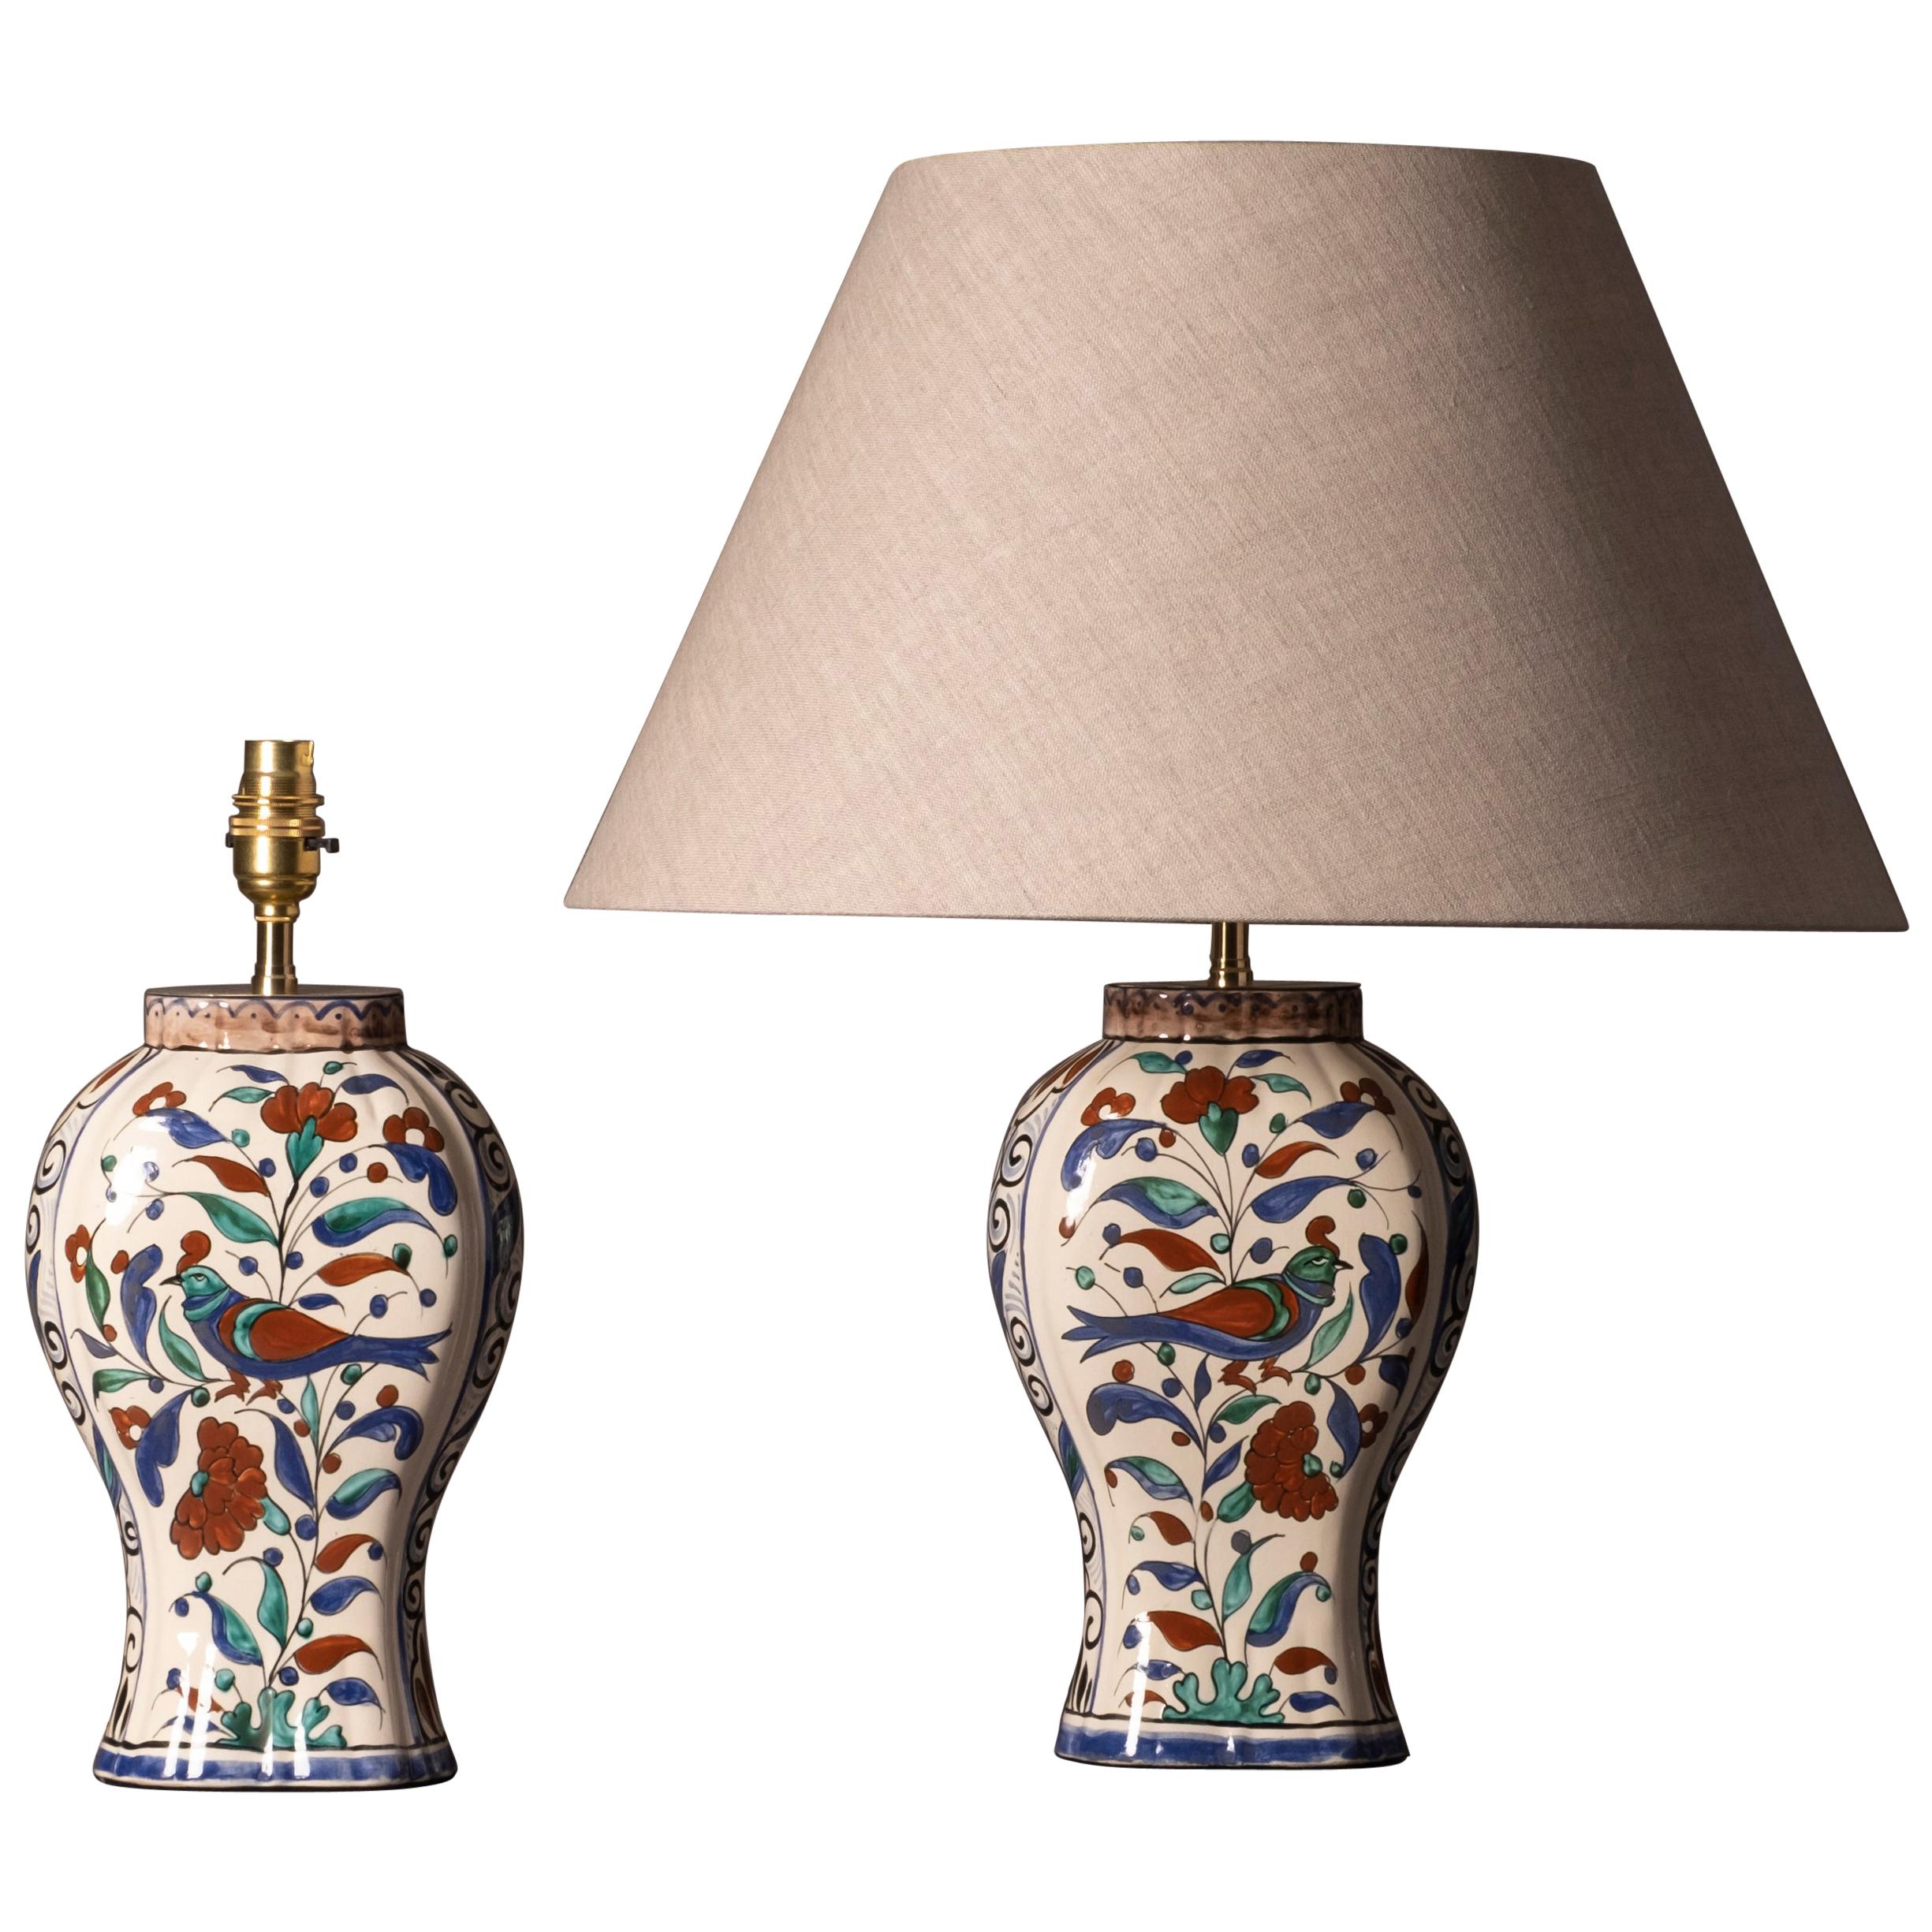 Pair of Early 20th Century Faience Vase Lamps